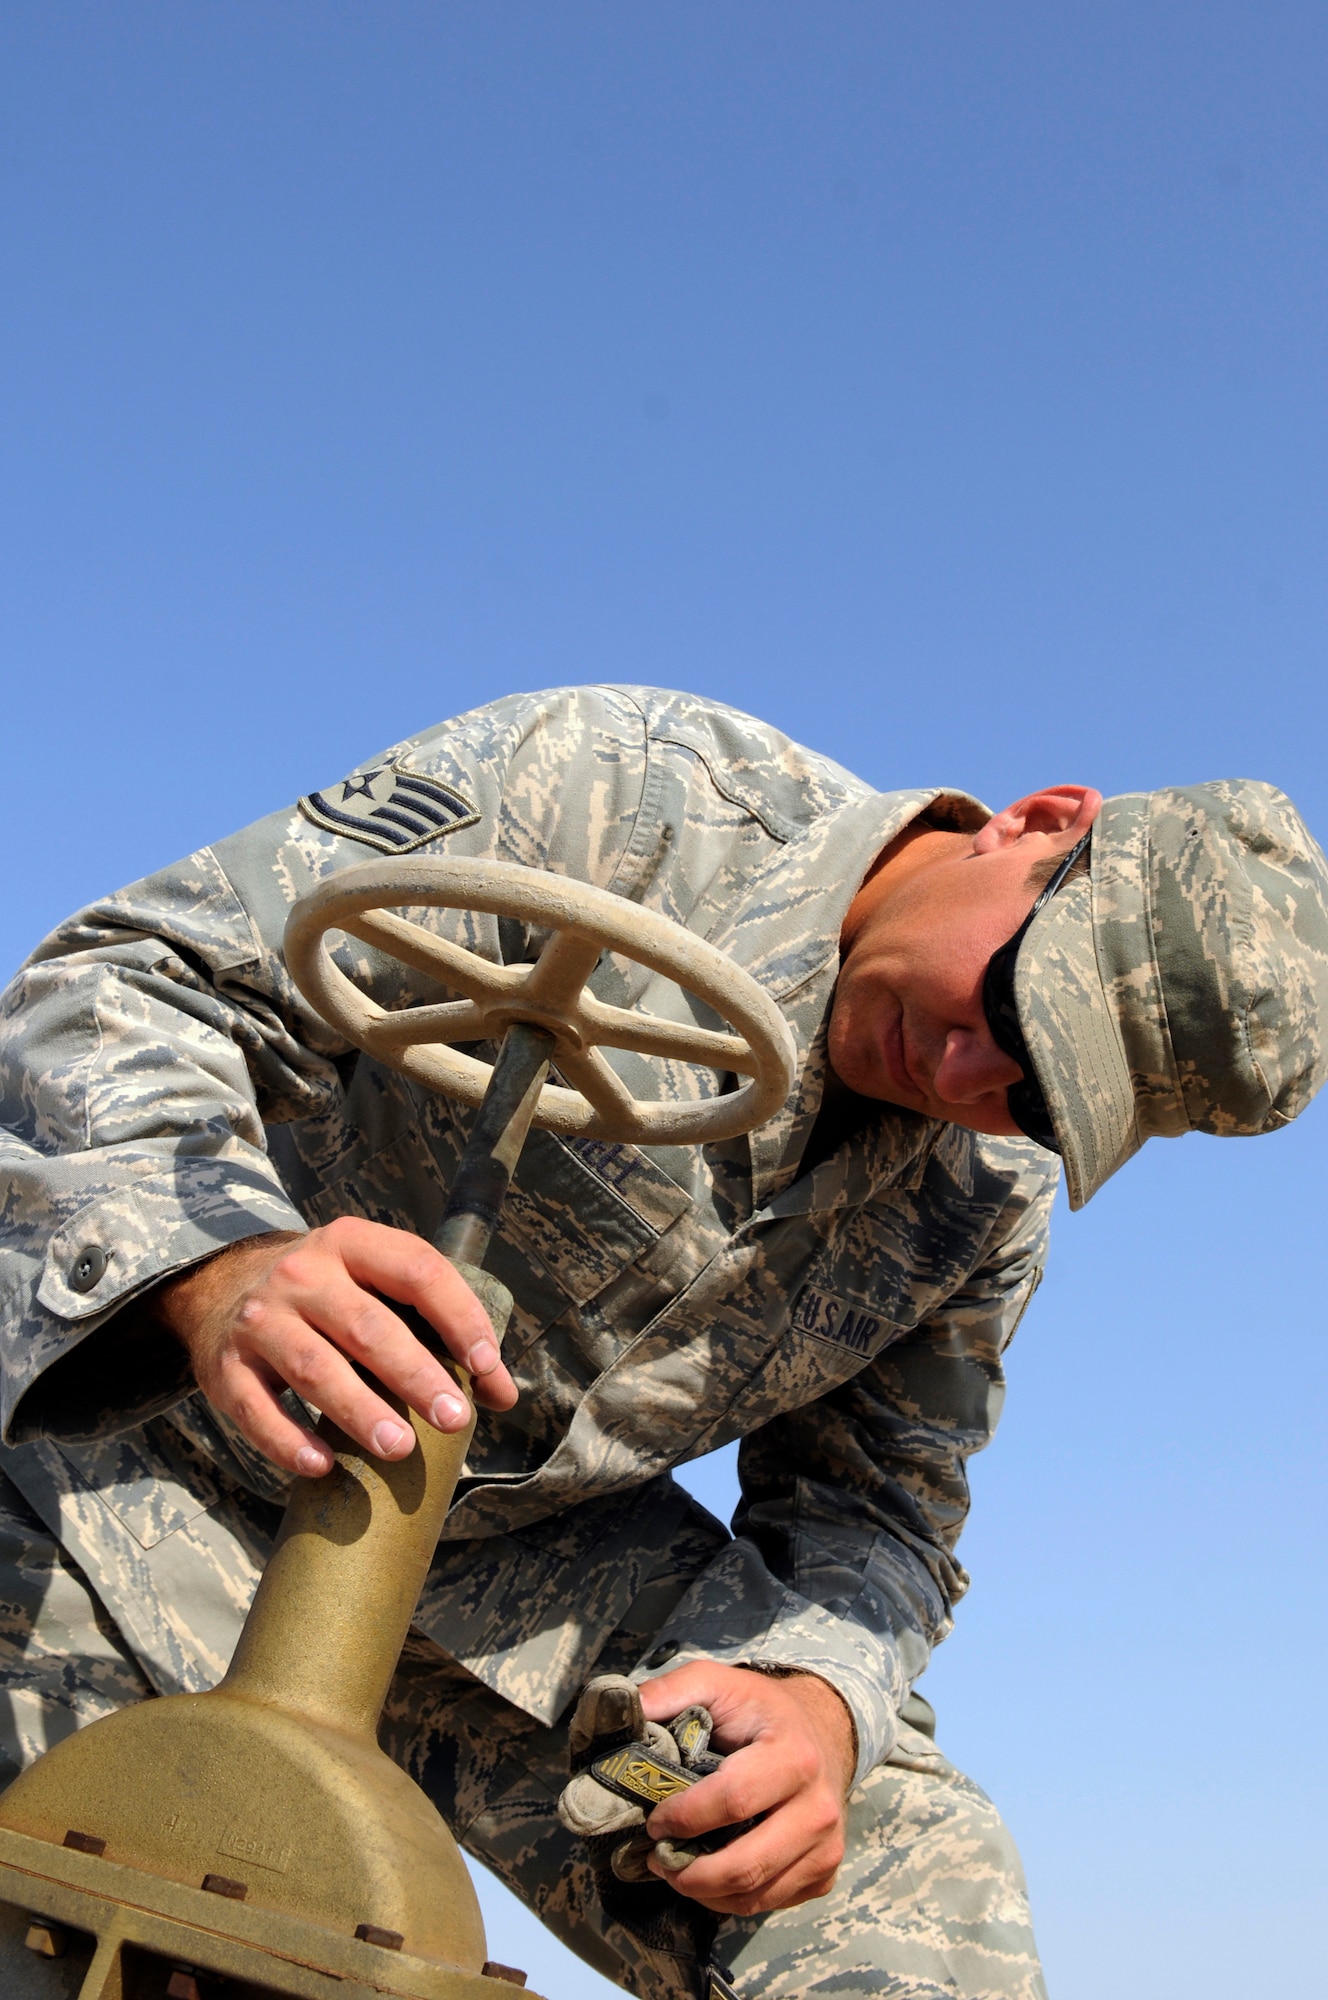 Staff Sgt. George Mitchell, fuels craftsman assigned to the 379th Expeditionary Logistics Readiness Squadron, confirms that following tightening a valve no fuel is leaking, during a regularly scheduled security and leak check of the fuel pipeline from bulk storage to operating storage, Nov. 14, at an undisclosed air base in Southwest Asia.  "Running the line" is a preventative procedure that keeps the fuel flowing to "fuel the fight."  Approximately one million gallons of fuel are moved each day through the 379 ELRS fuels section, keeping aircraft flying in Operations Iraqi and Enduring Freedom and Joint Task Force-Horn of Africa.  Sergeant Mitchell, a native of Lady Lake, Fla., is deployed from Shaw Air Force Base, S.C.  (U.S. Air Force Base photo by Tech. Sgt. Michael Boquette/Released)